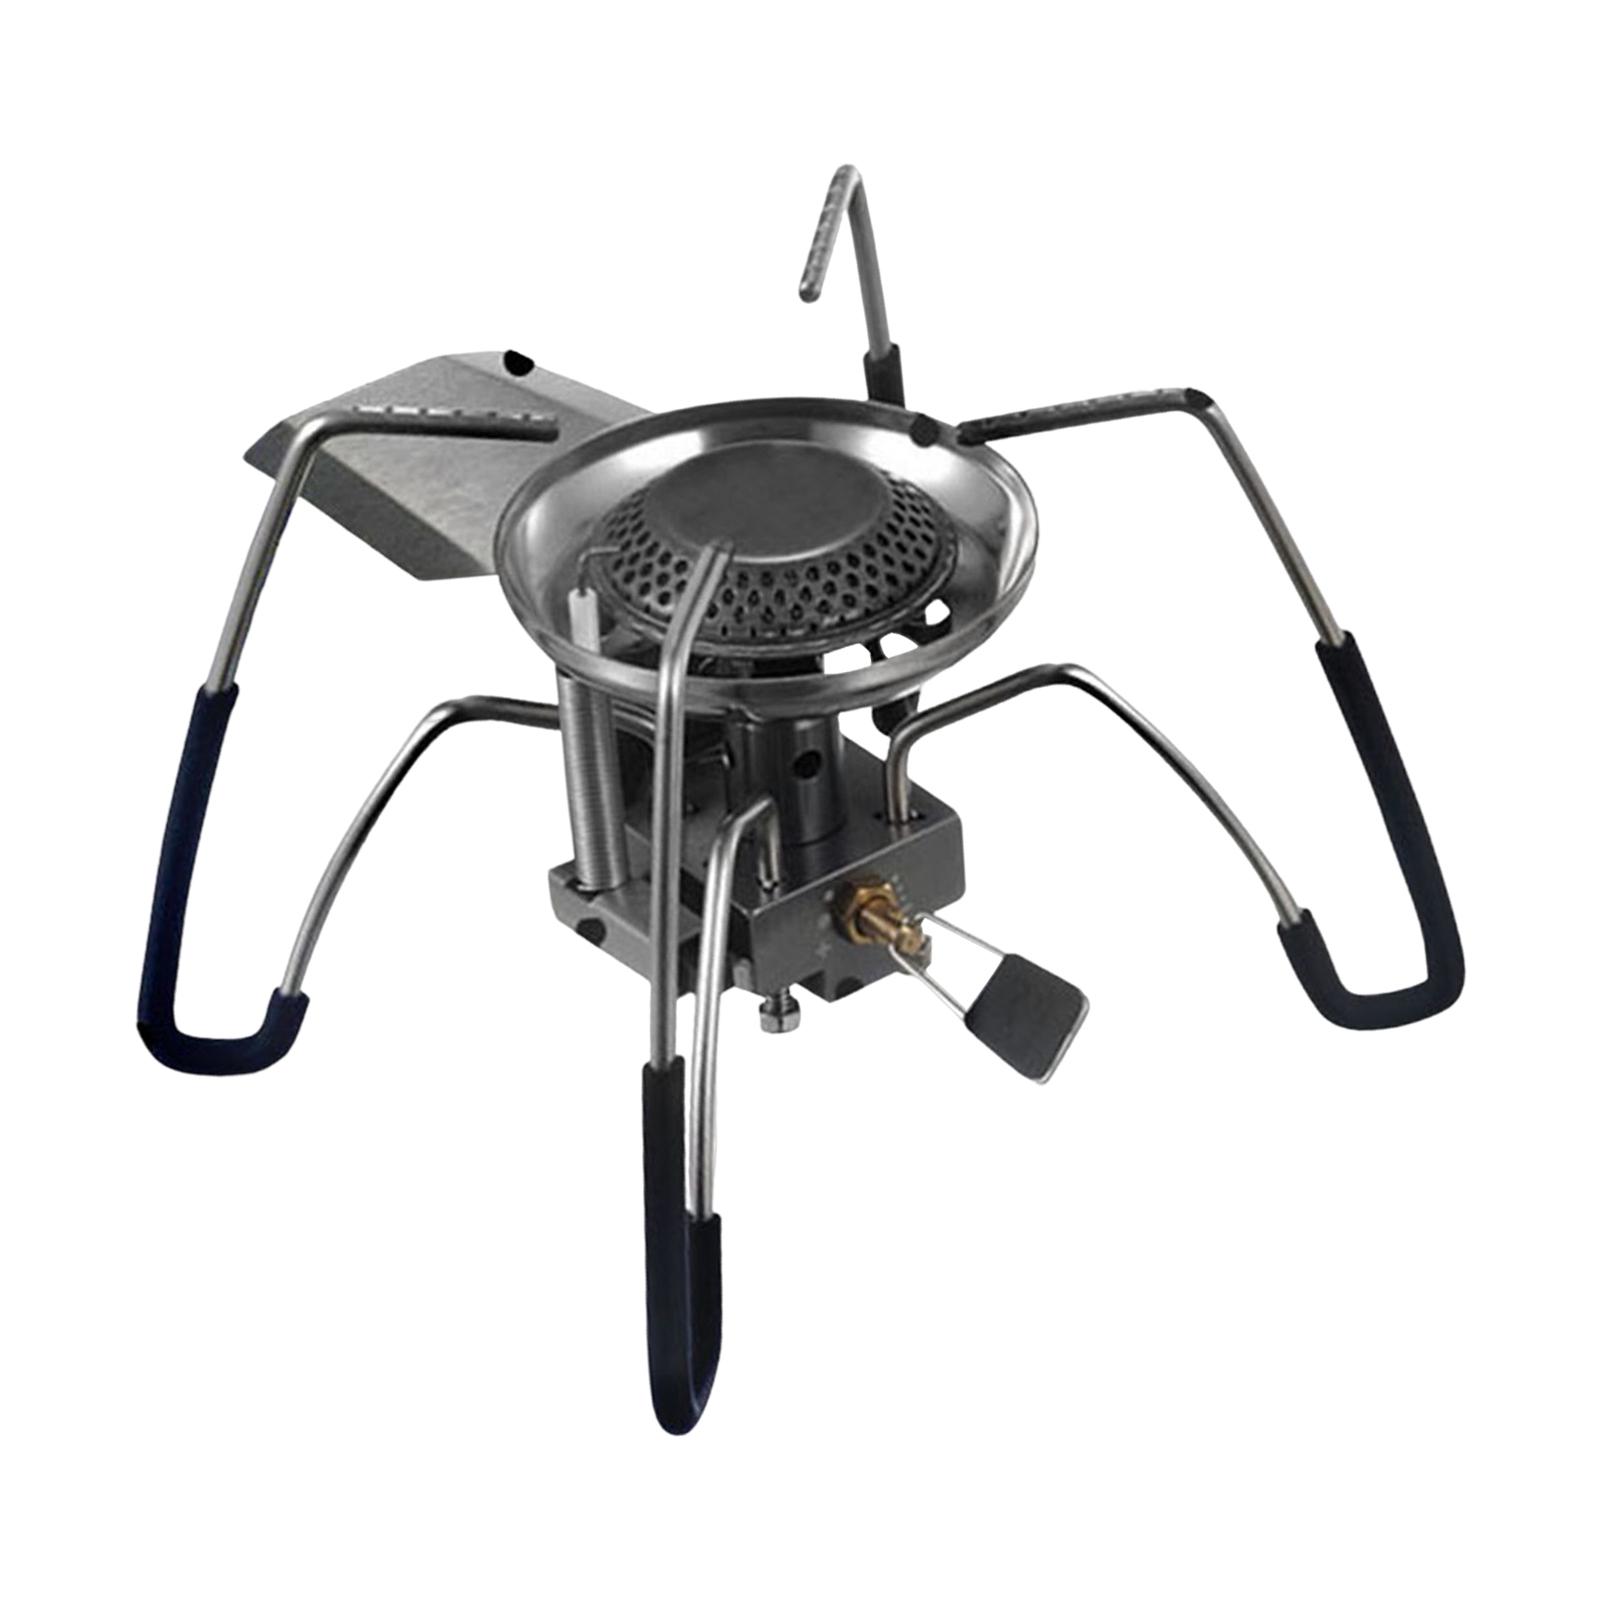 Folded Camping Gas Stove Burner with Carrying Bag Gadgets Gear Survival Kit Non Slip Spider Furnace for Mountaineering Cooking